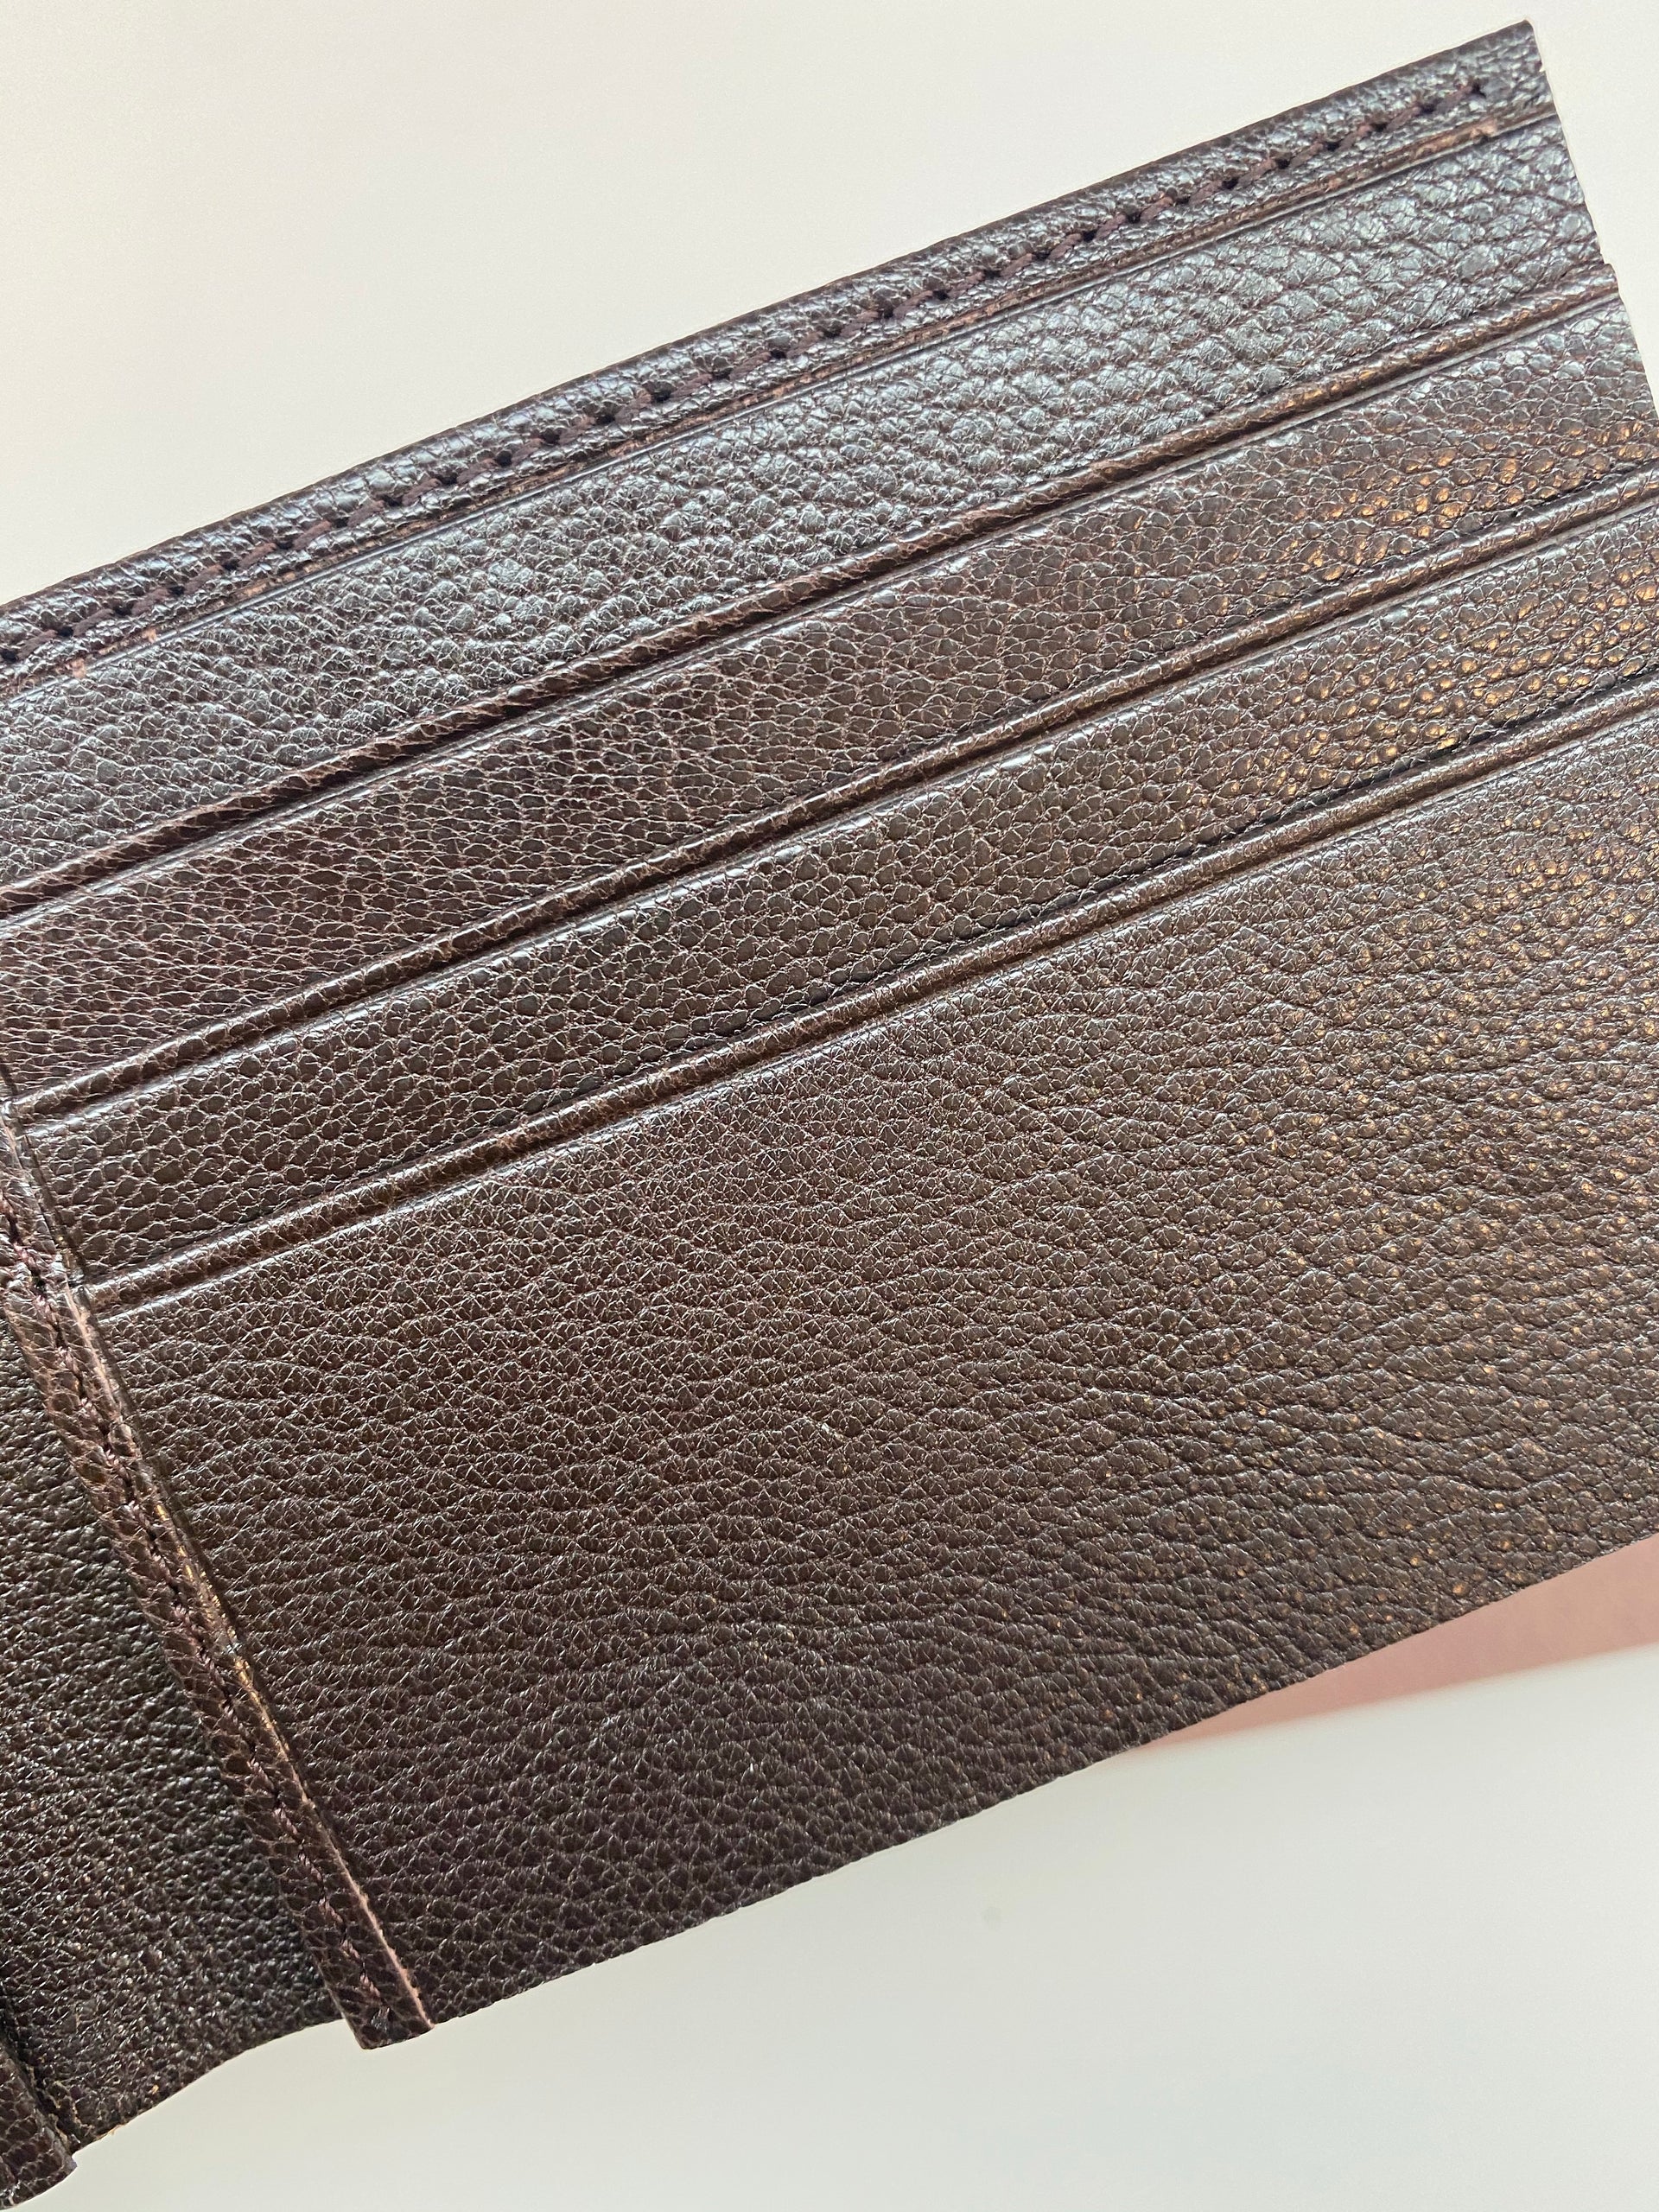 Full Grain Chèvre Leather Wallet Interiors and Precut / Skived Goat Backing